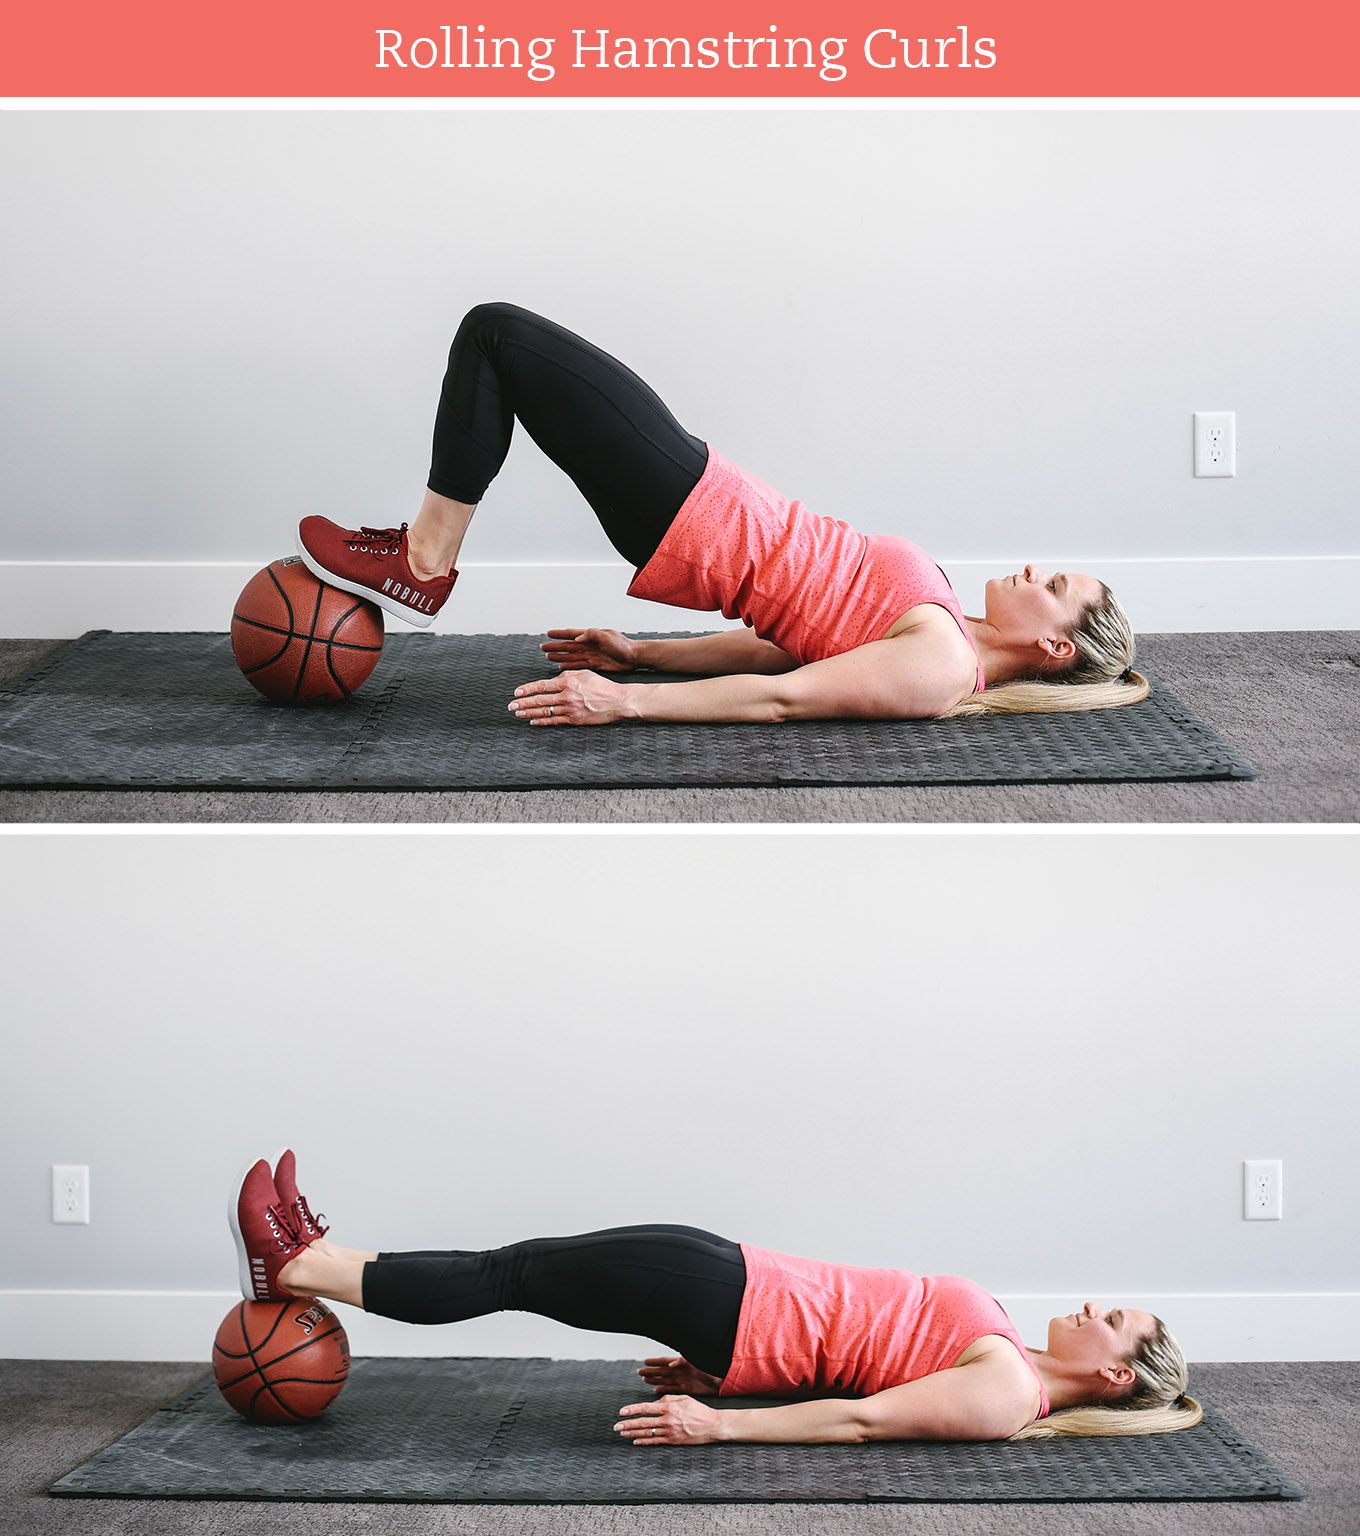 March Madness is right around the corner. Even if you're not a fan, you can still win big with this 30-minute basketball workout that challenges your stability, balance, and coordination.